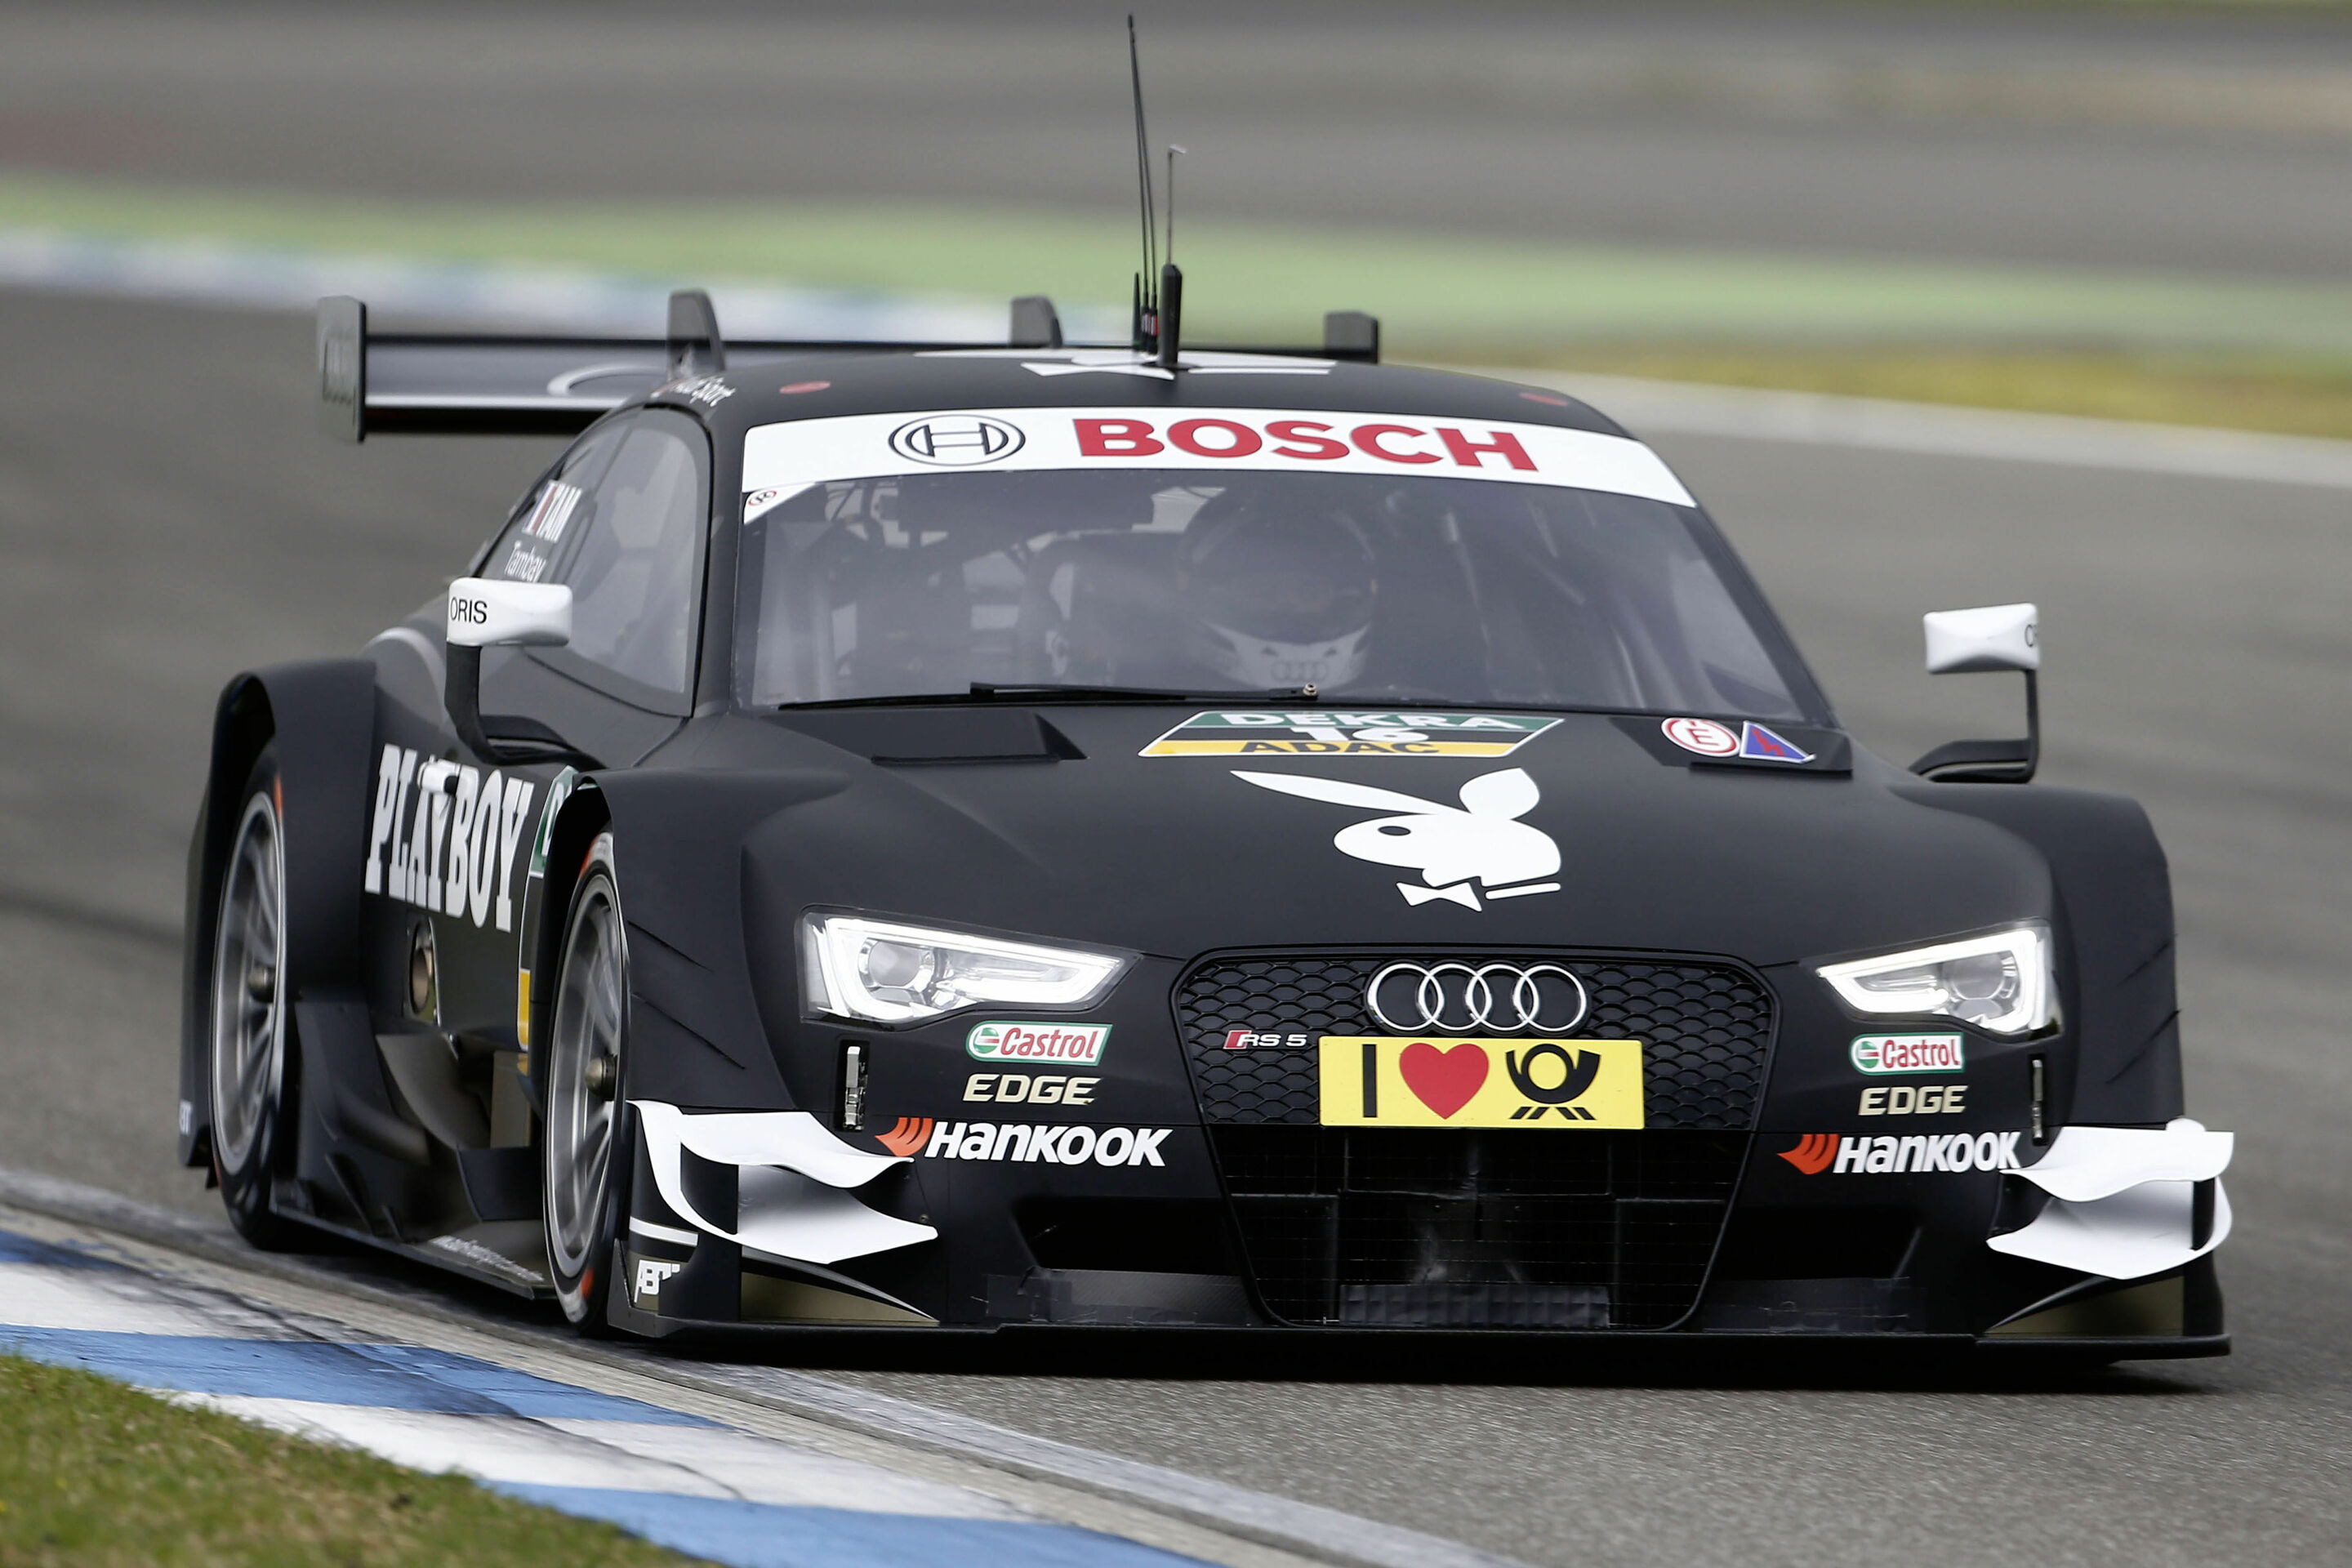 Audi driver Tambay to feature Playboy in the DTM